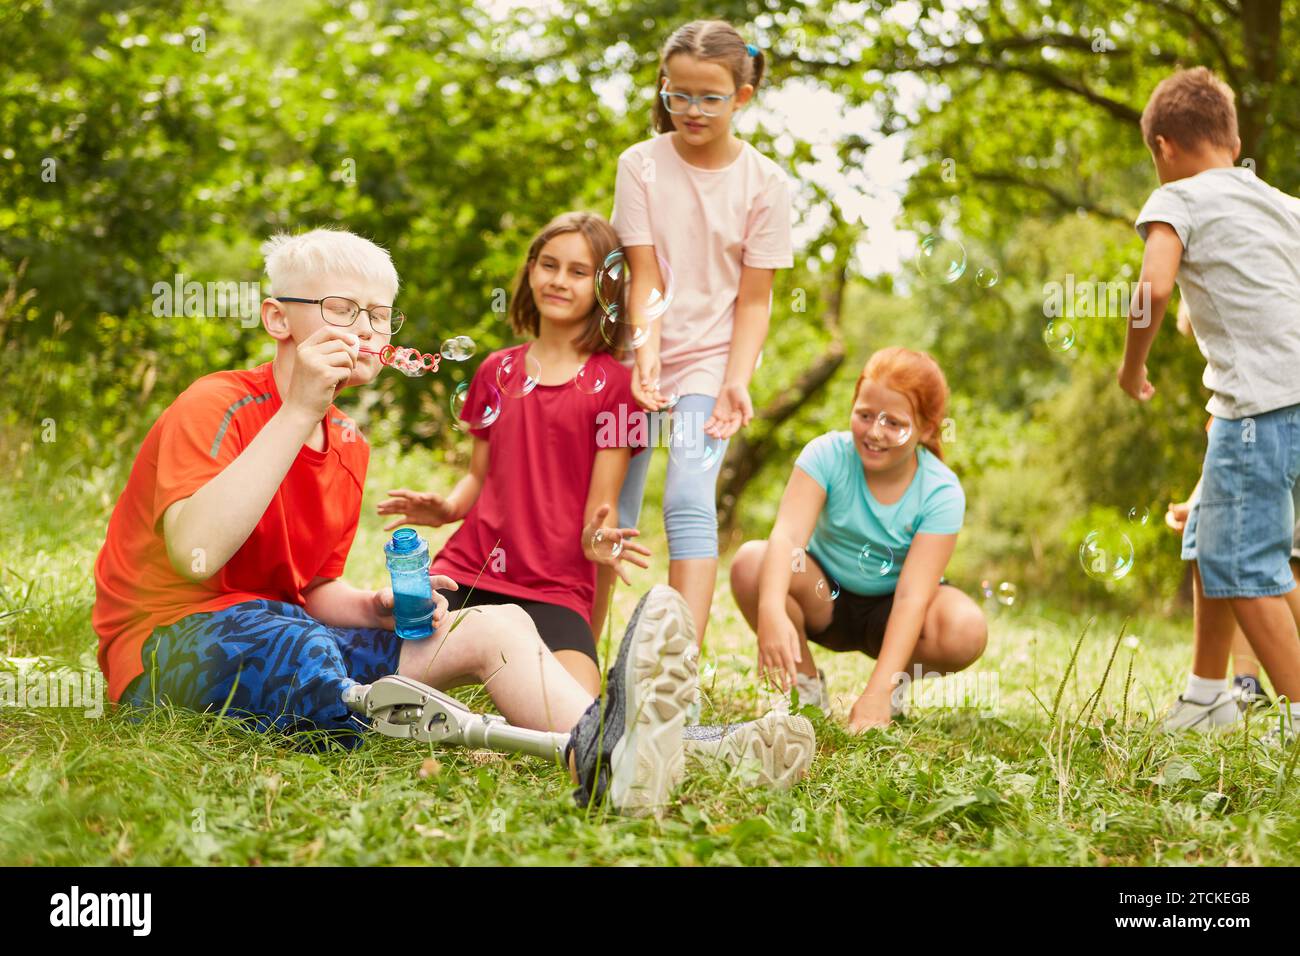 Disabled boy blowing bubbles with friends while sitting at park Stock Photo